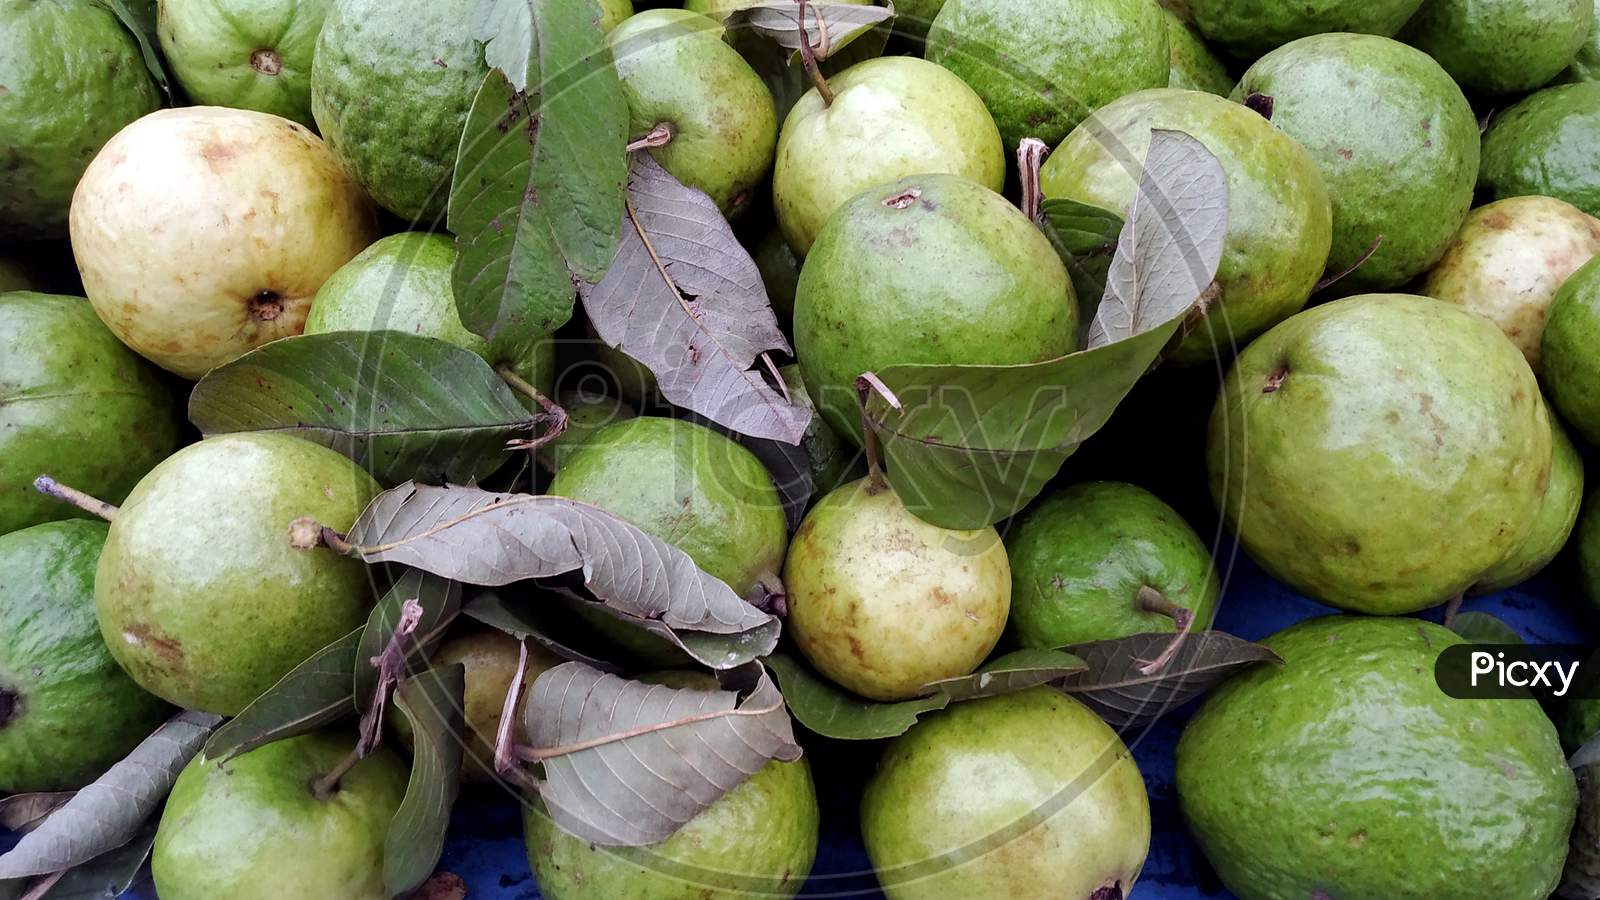 To Sell A Bunch Of Guava On The Street Market